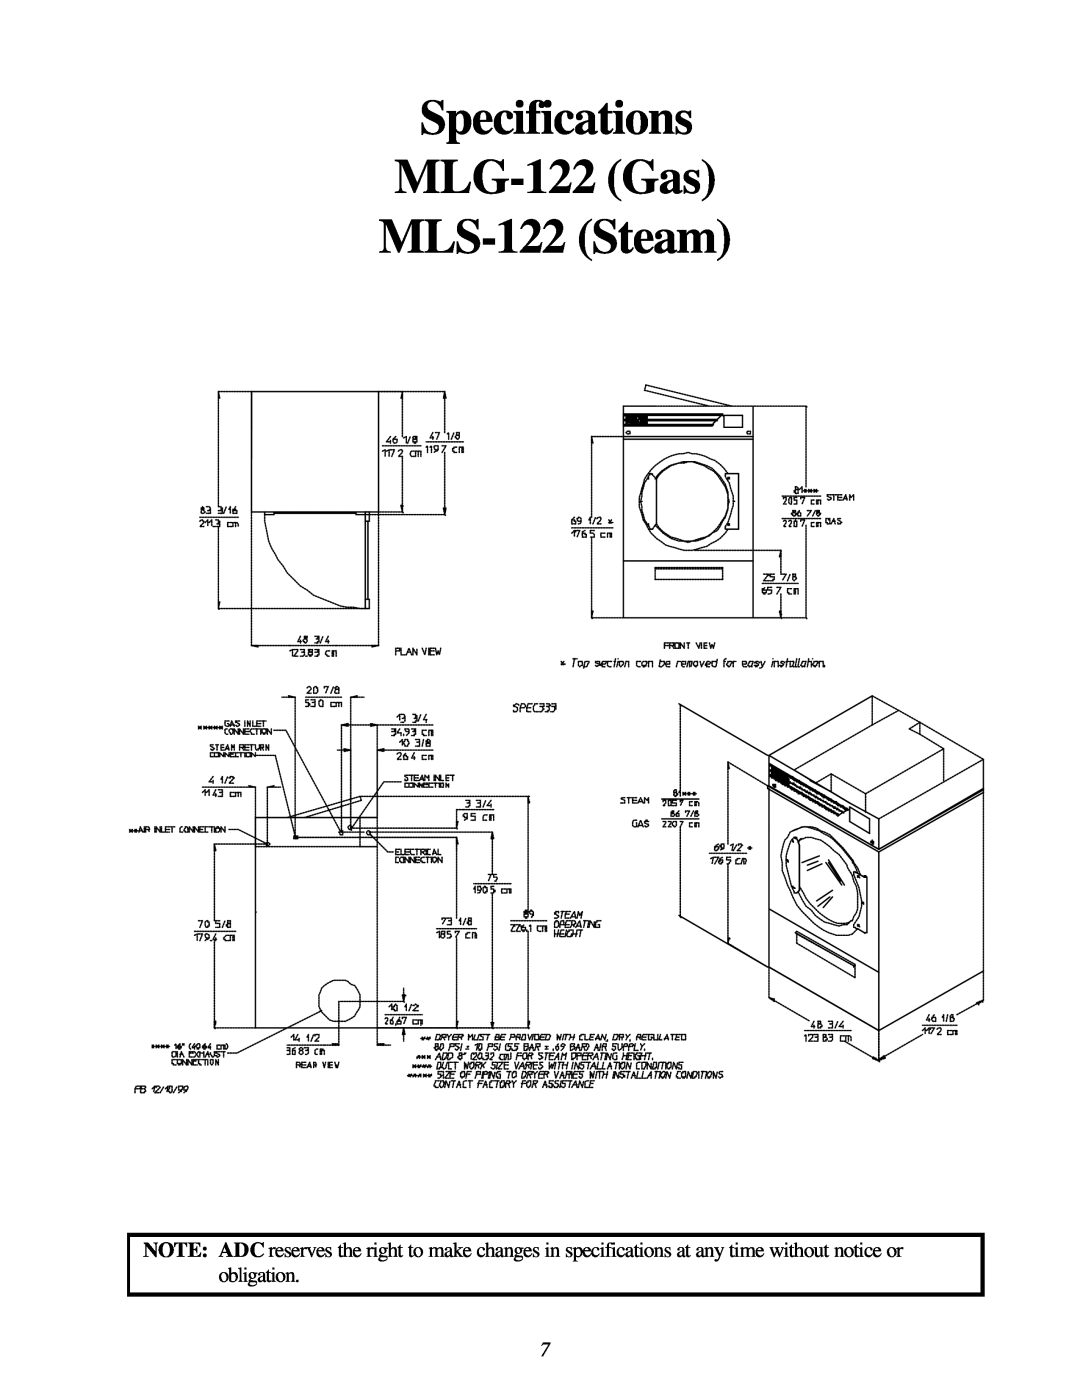 American Dryer Corp ML-122D installation manual Specifications MLG-122 Gas MLS-122 Steam 